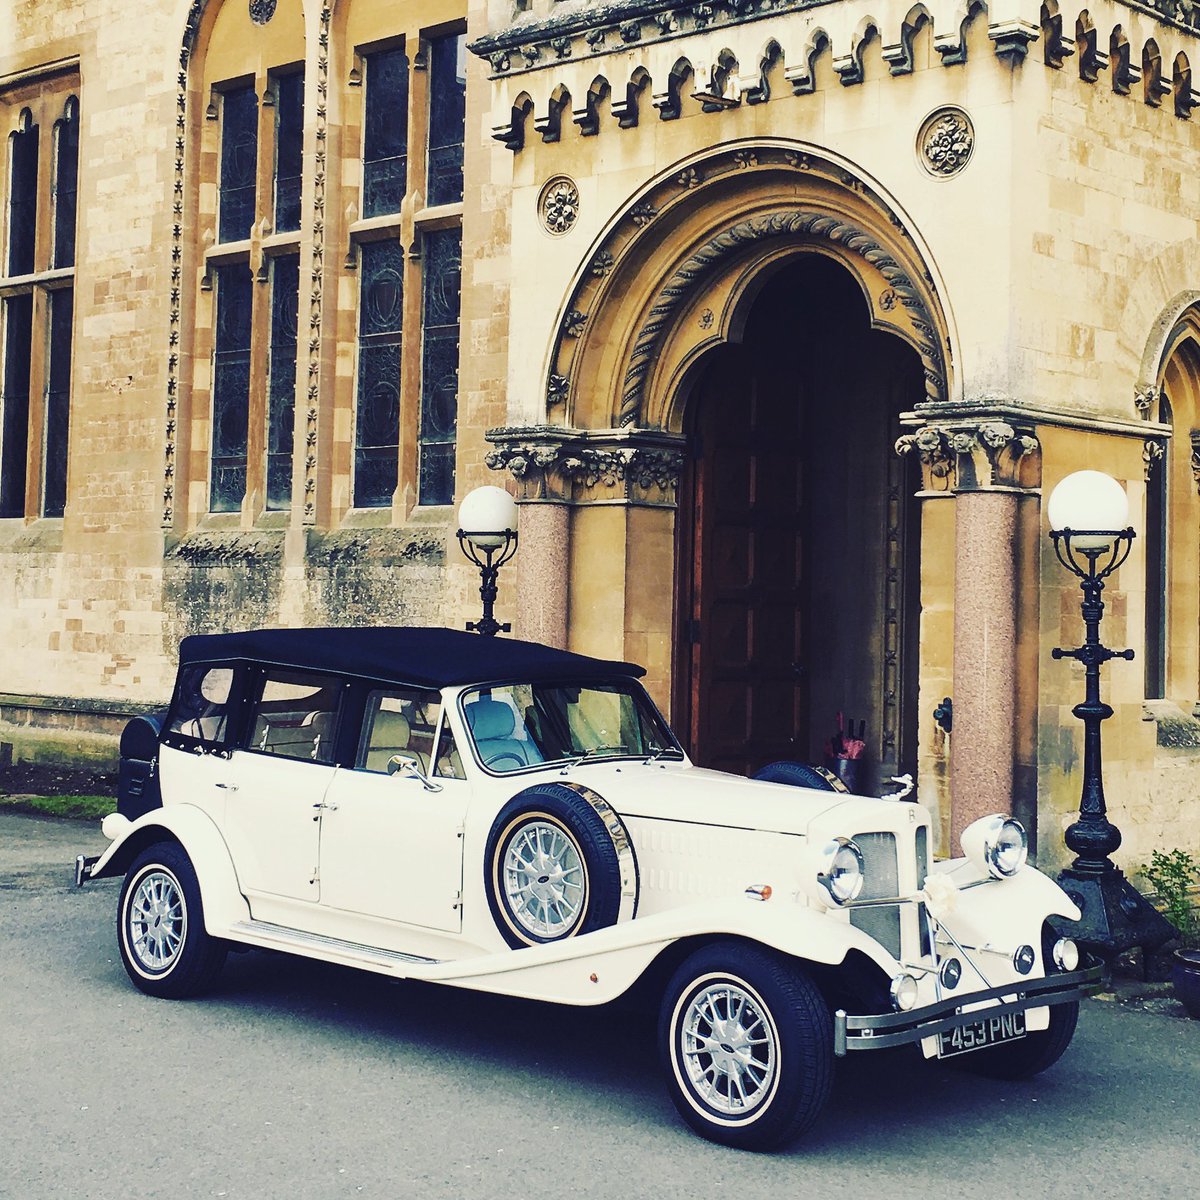 Book your vintage wedding car & limo at best prices. #wedding2023 #wedding #limo #bridal #2023wedding #bigday #vintagecar #classiccars a2z-limos.co.uk